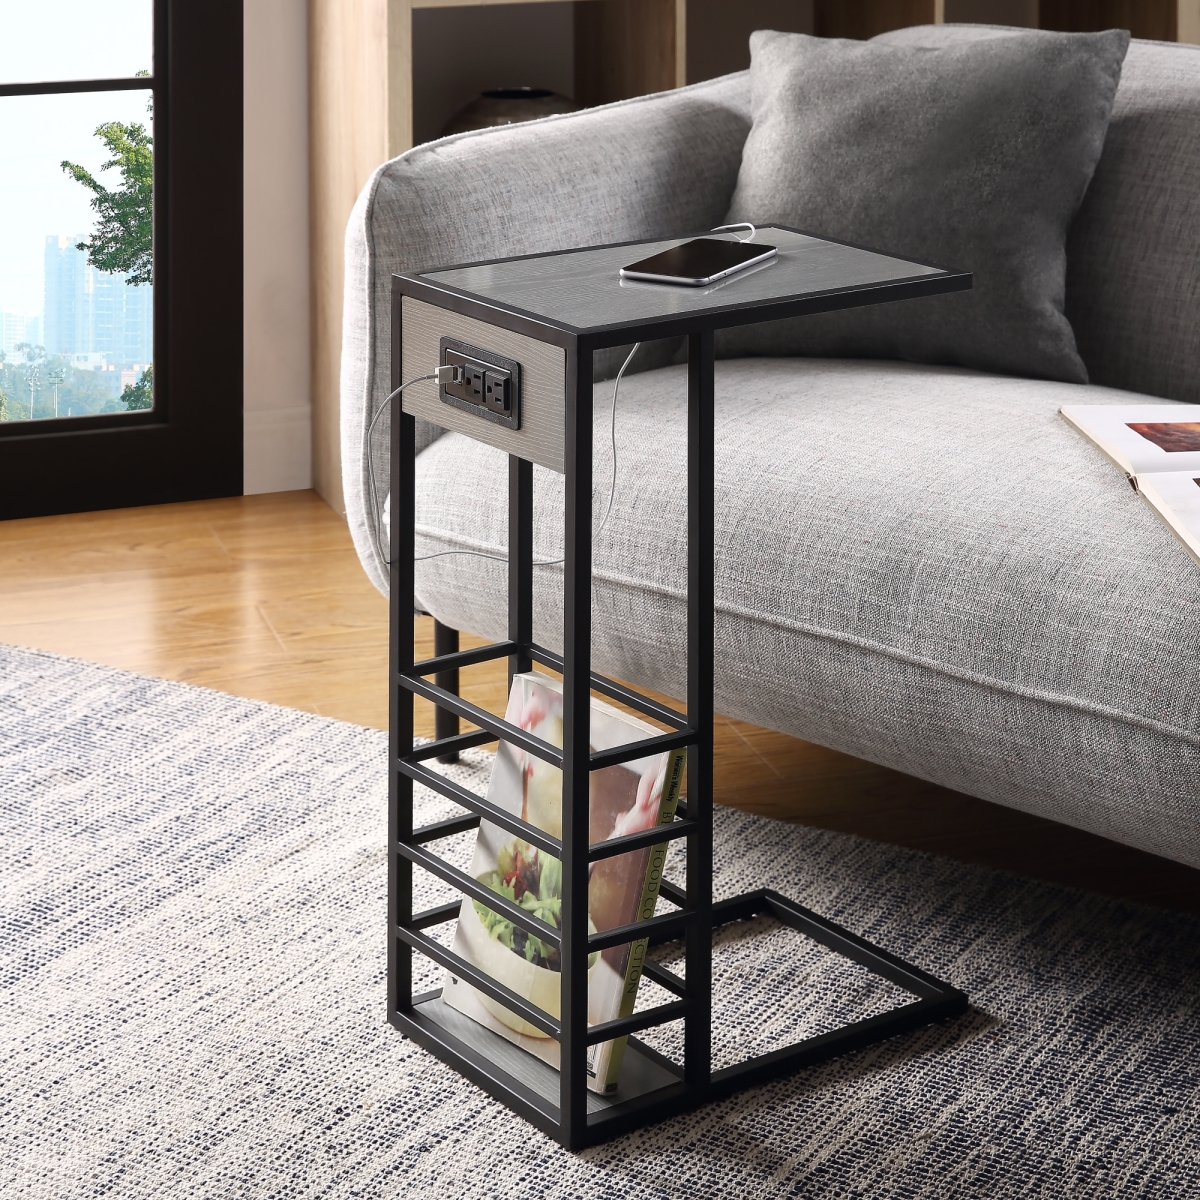 Let99-26gr-ue Posh Living Arian C Table, End Table, Side Table & Laptop Stand, Grey & Black